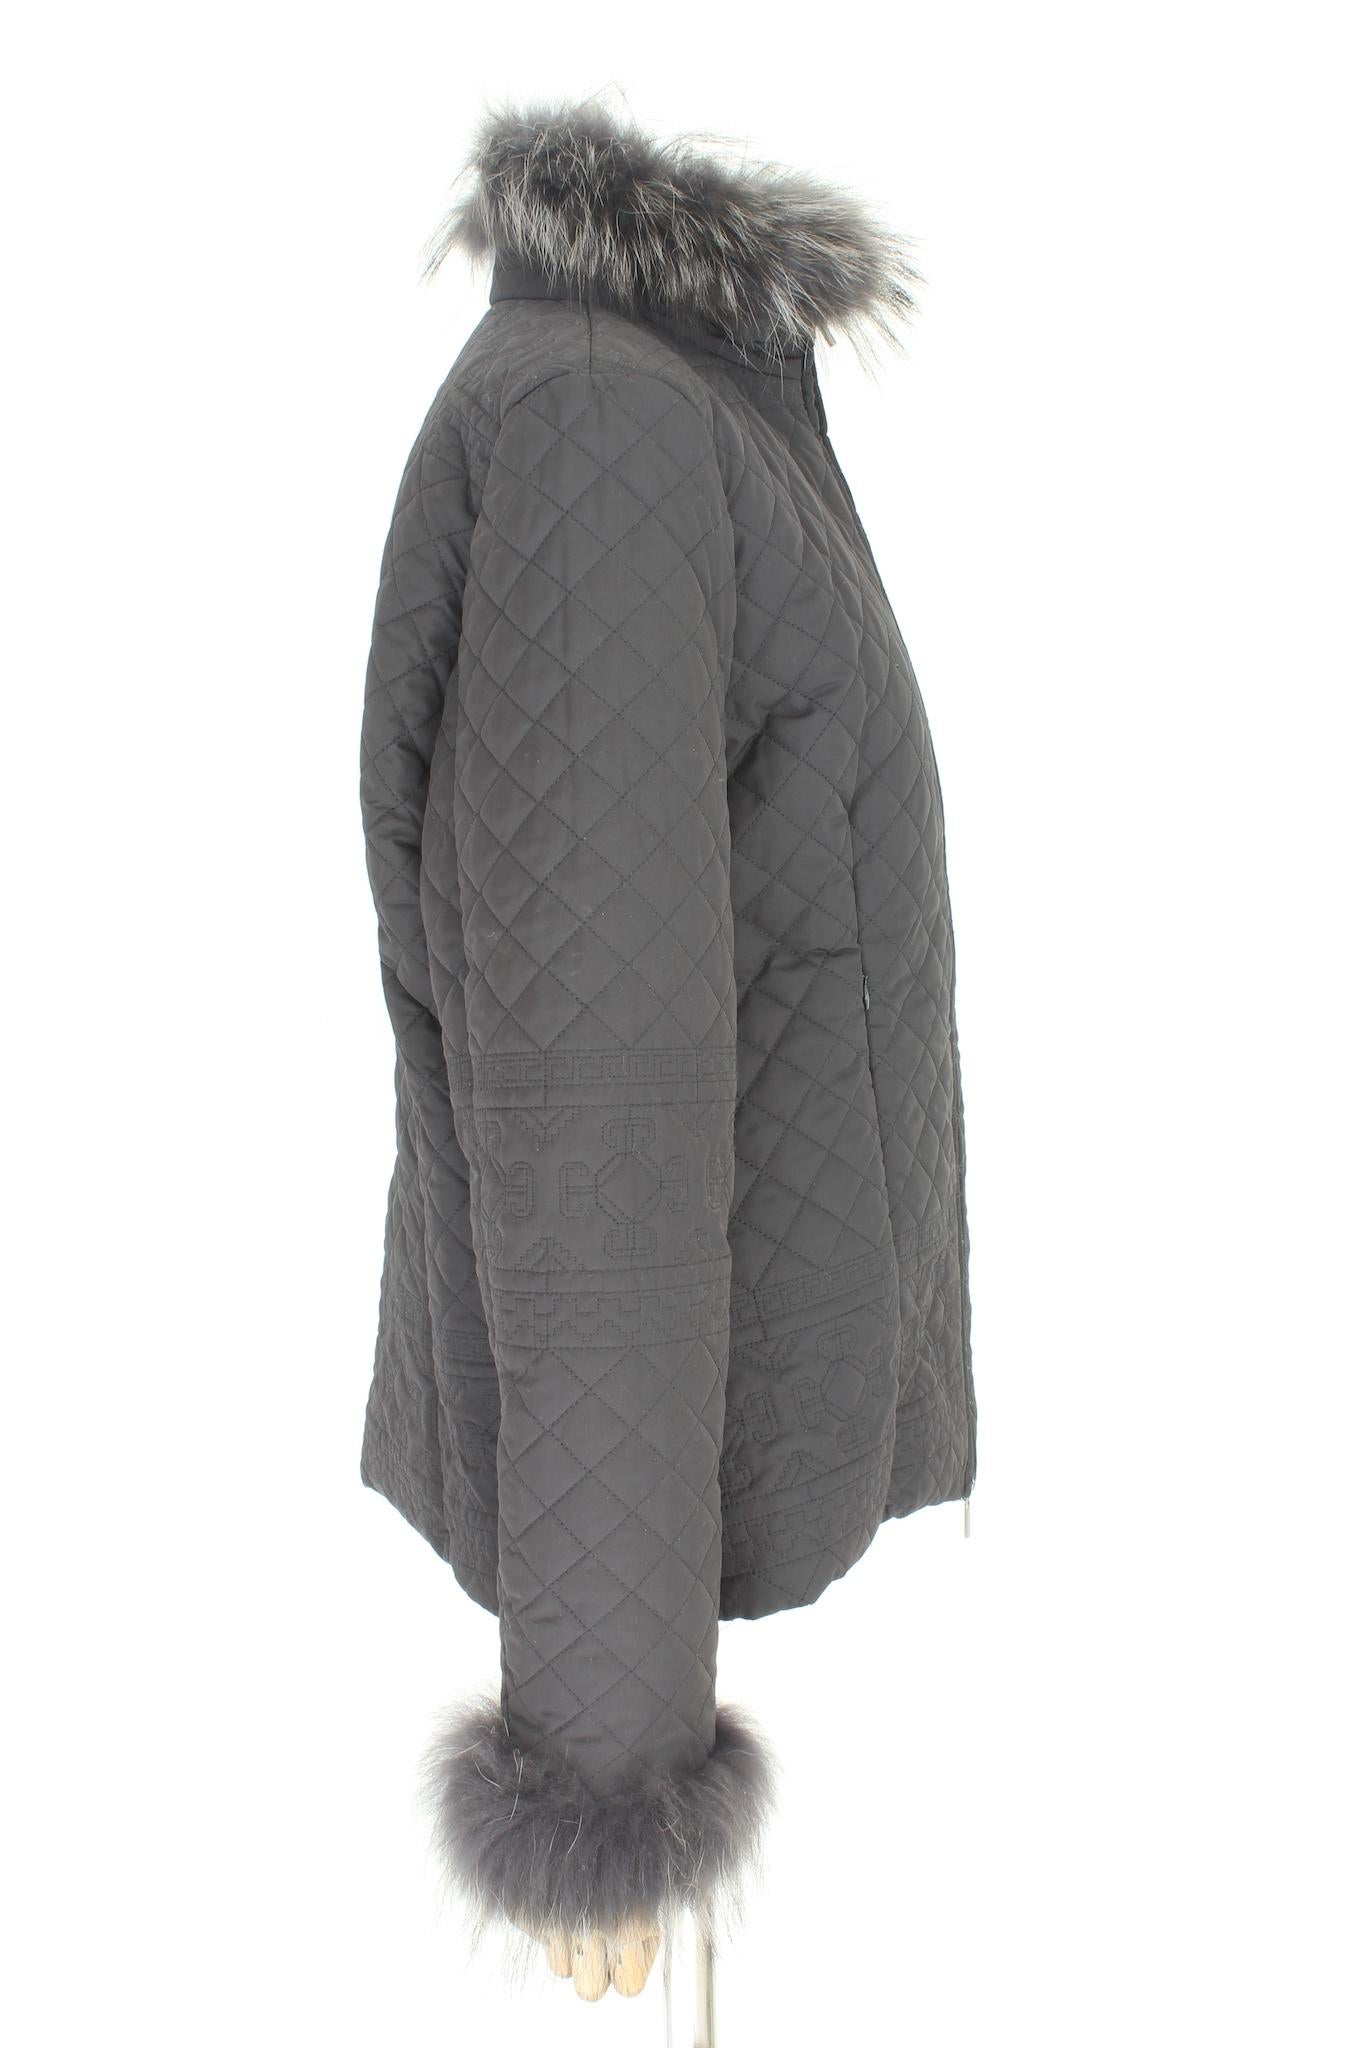 Madreperla Firenze vintage 2000s women's jacket. Gray down jacket, fox inserts on the collar and cuffs, zip closure, tone-on-tone stitching. 100% polyamide fabric. Made in Italy.

Size: 46 It 12 Us 14 Uk

Shoulder: 46 cm
Bust/Chest: 52 cm
Sleeve: 63